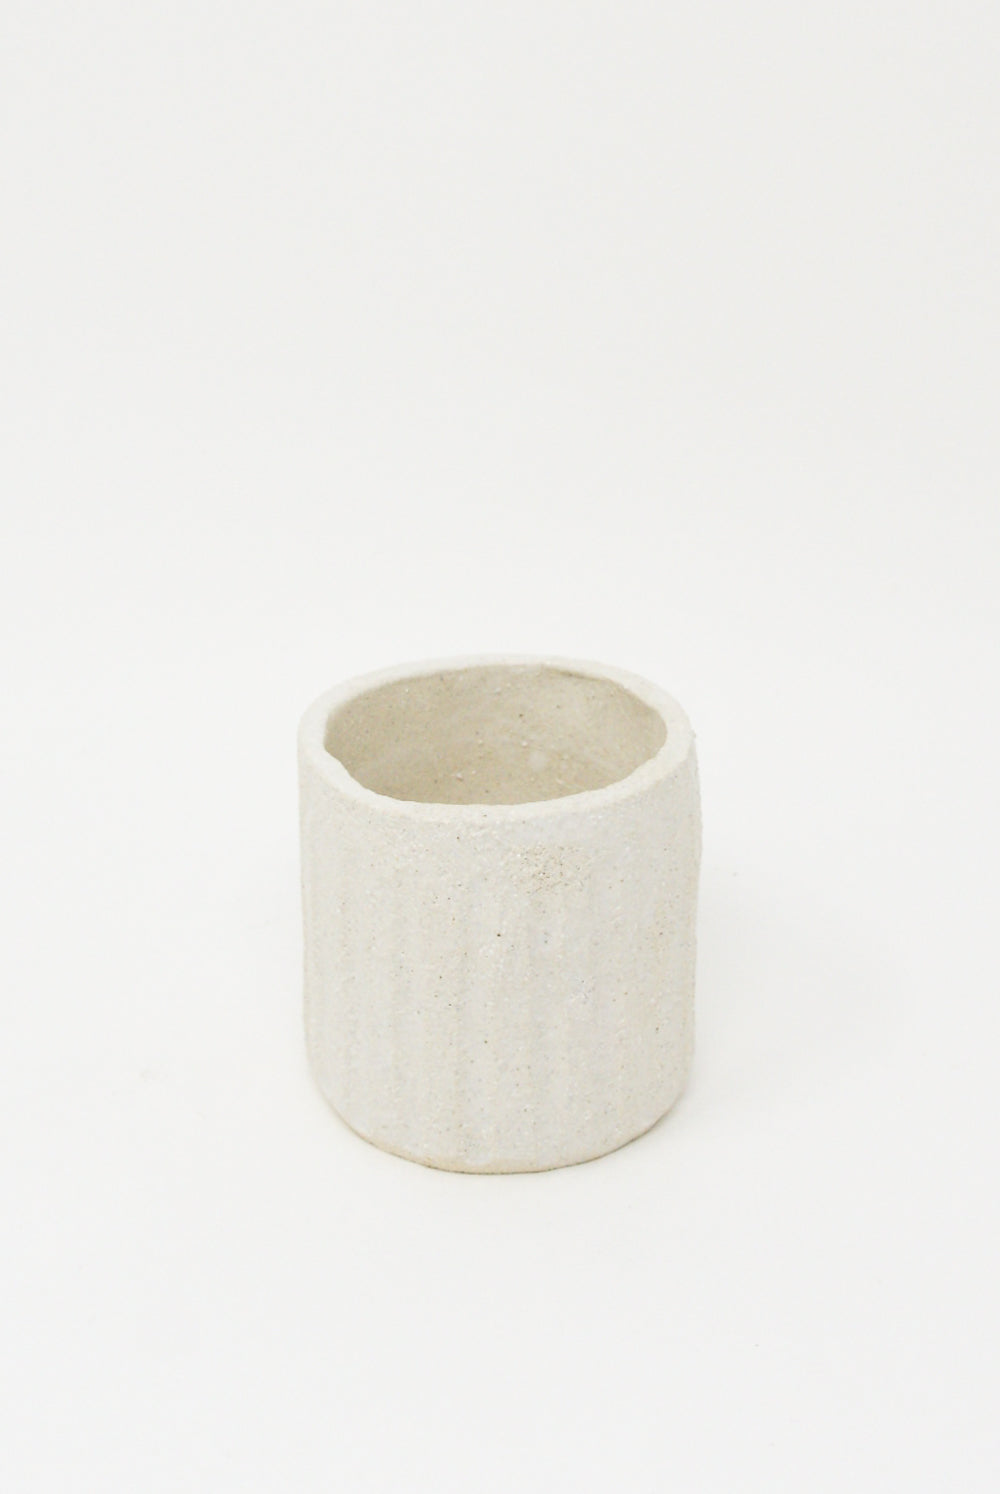 A small handmade ceramic Tea Cup in Natural by Clandestine on a white background.